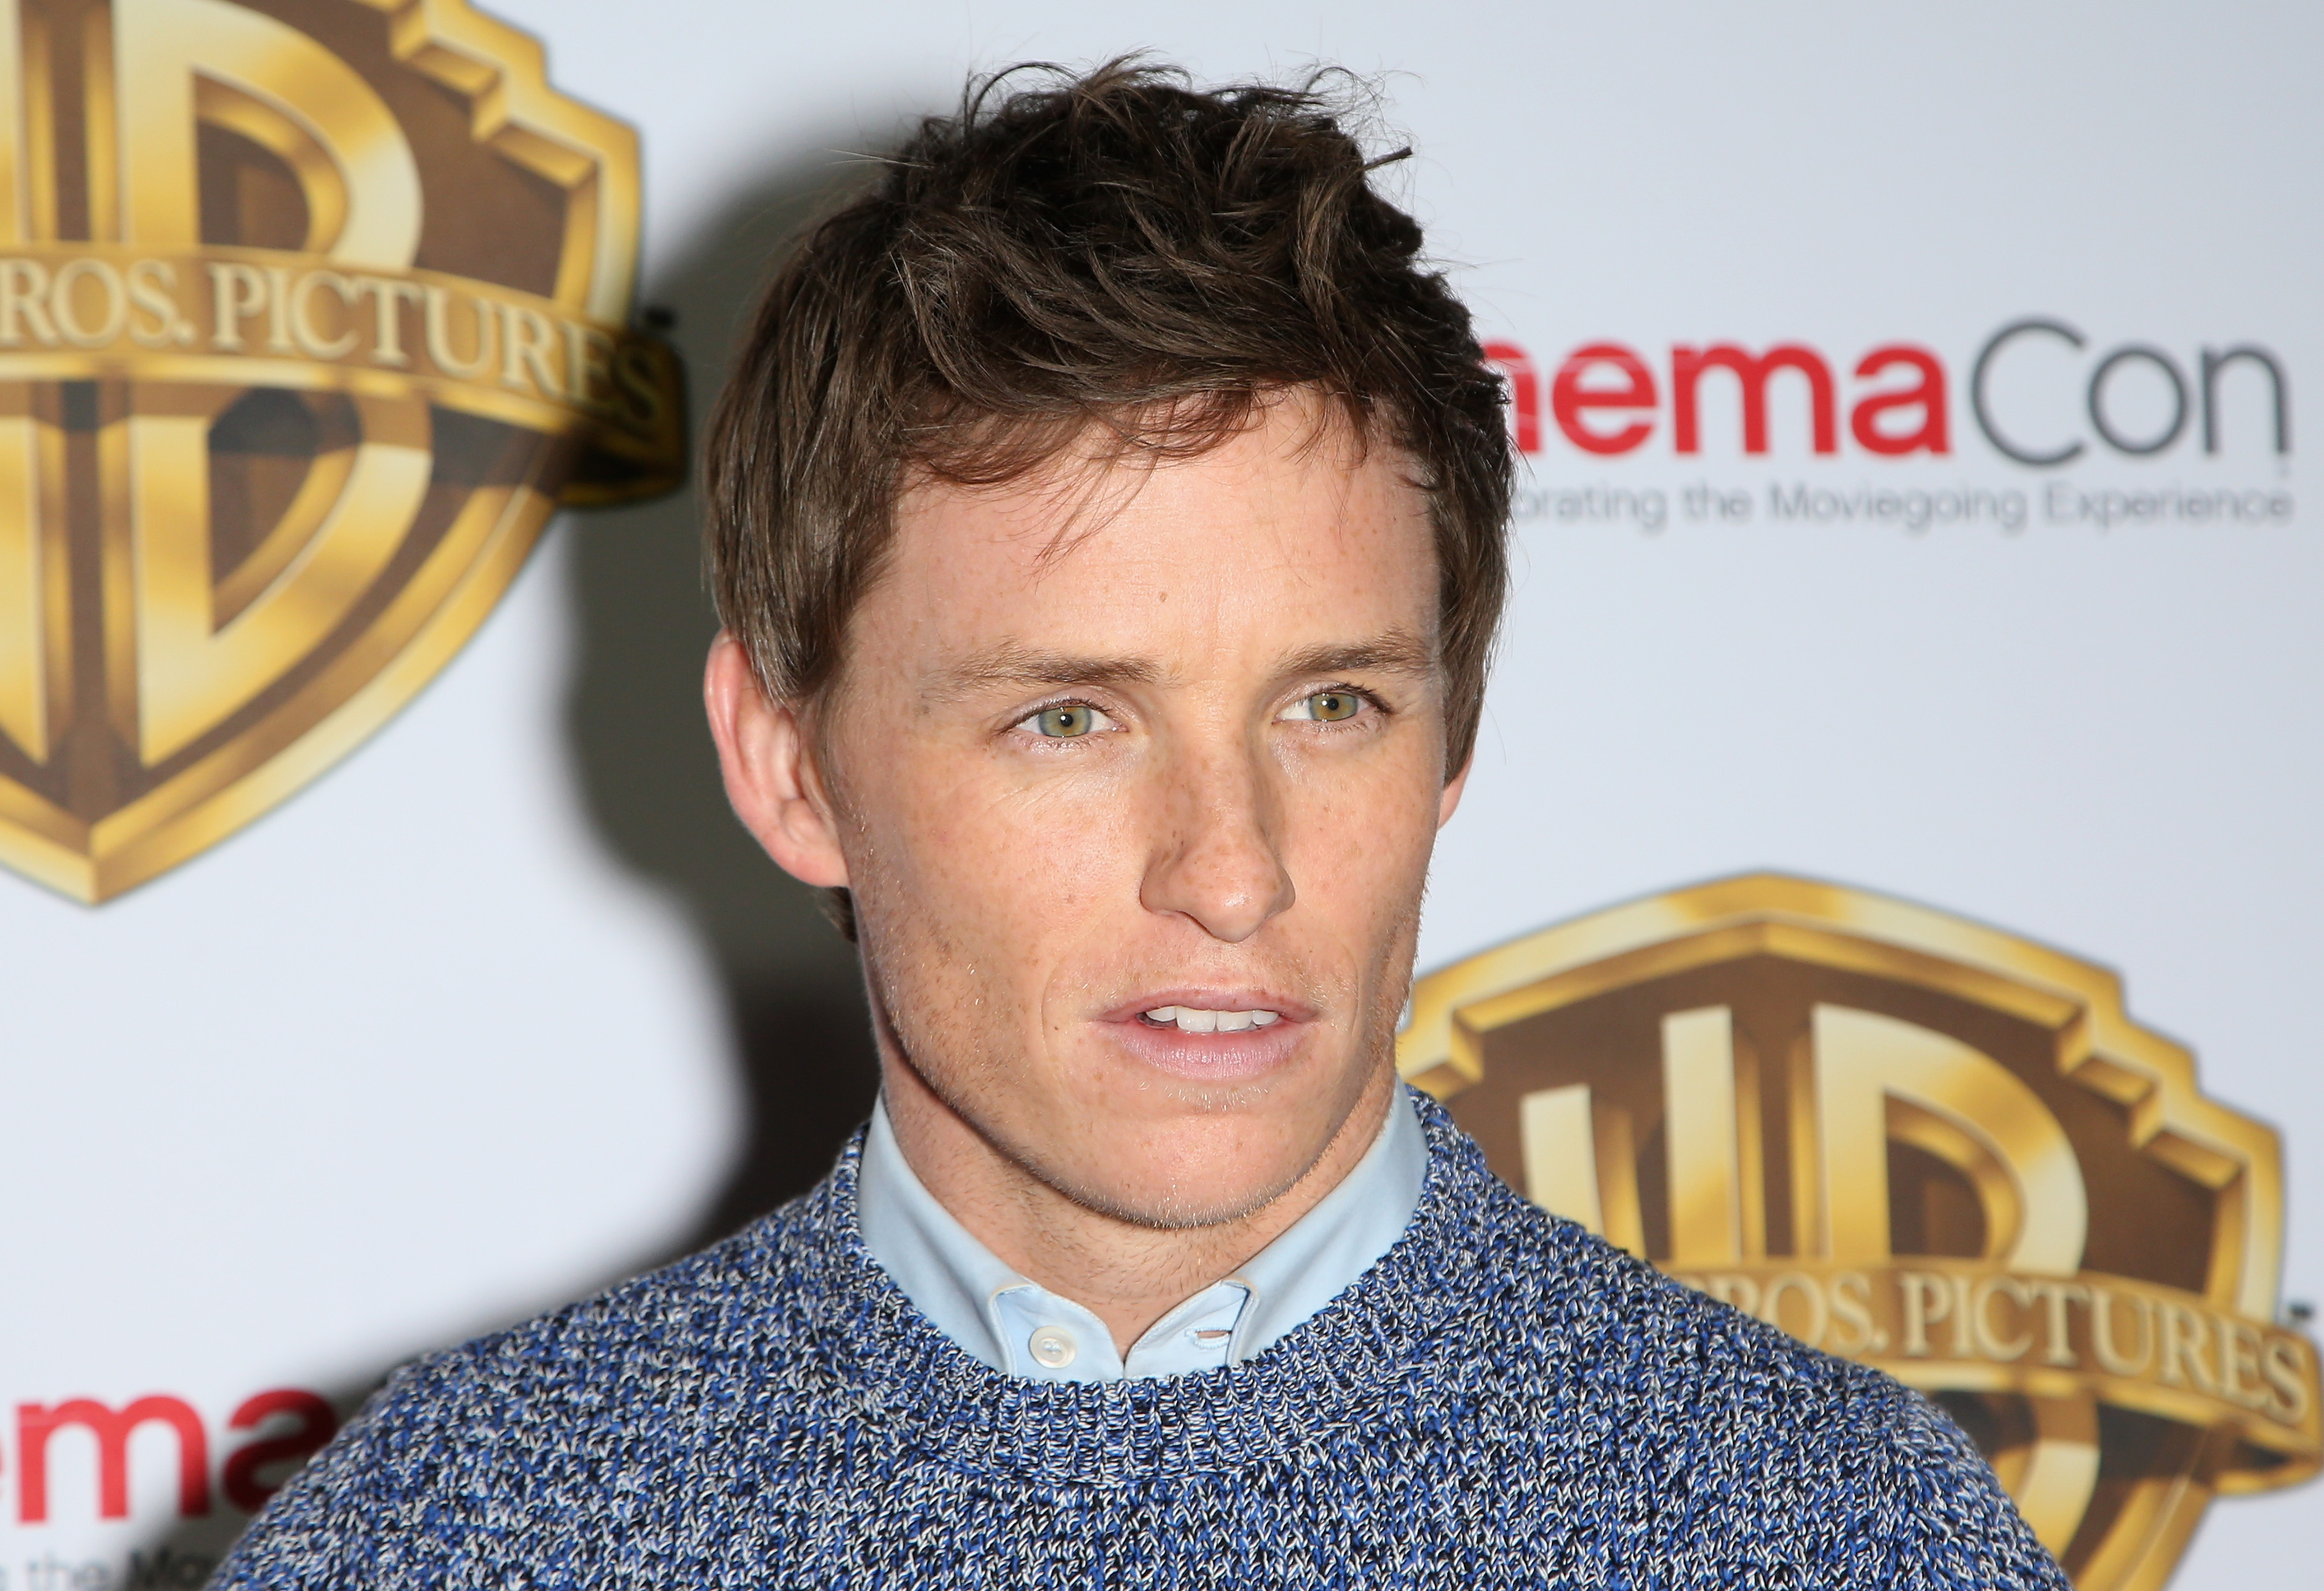 Actor Eddie Redmayne attends Warner Bros. Pictures' "The Big Picture," an exclusive presentation highlighting the summer of 2016 and beyond at The Colosseum at Caesars Palace. (Gabe Ginsberg&mdash;Getty Images)